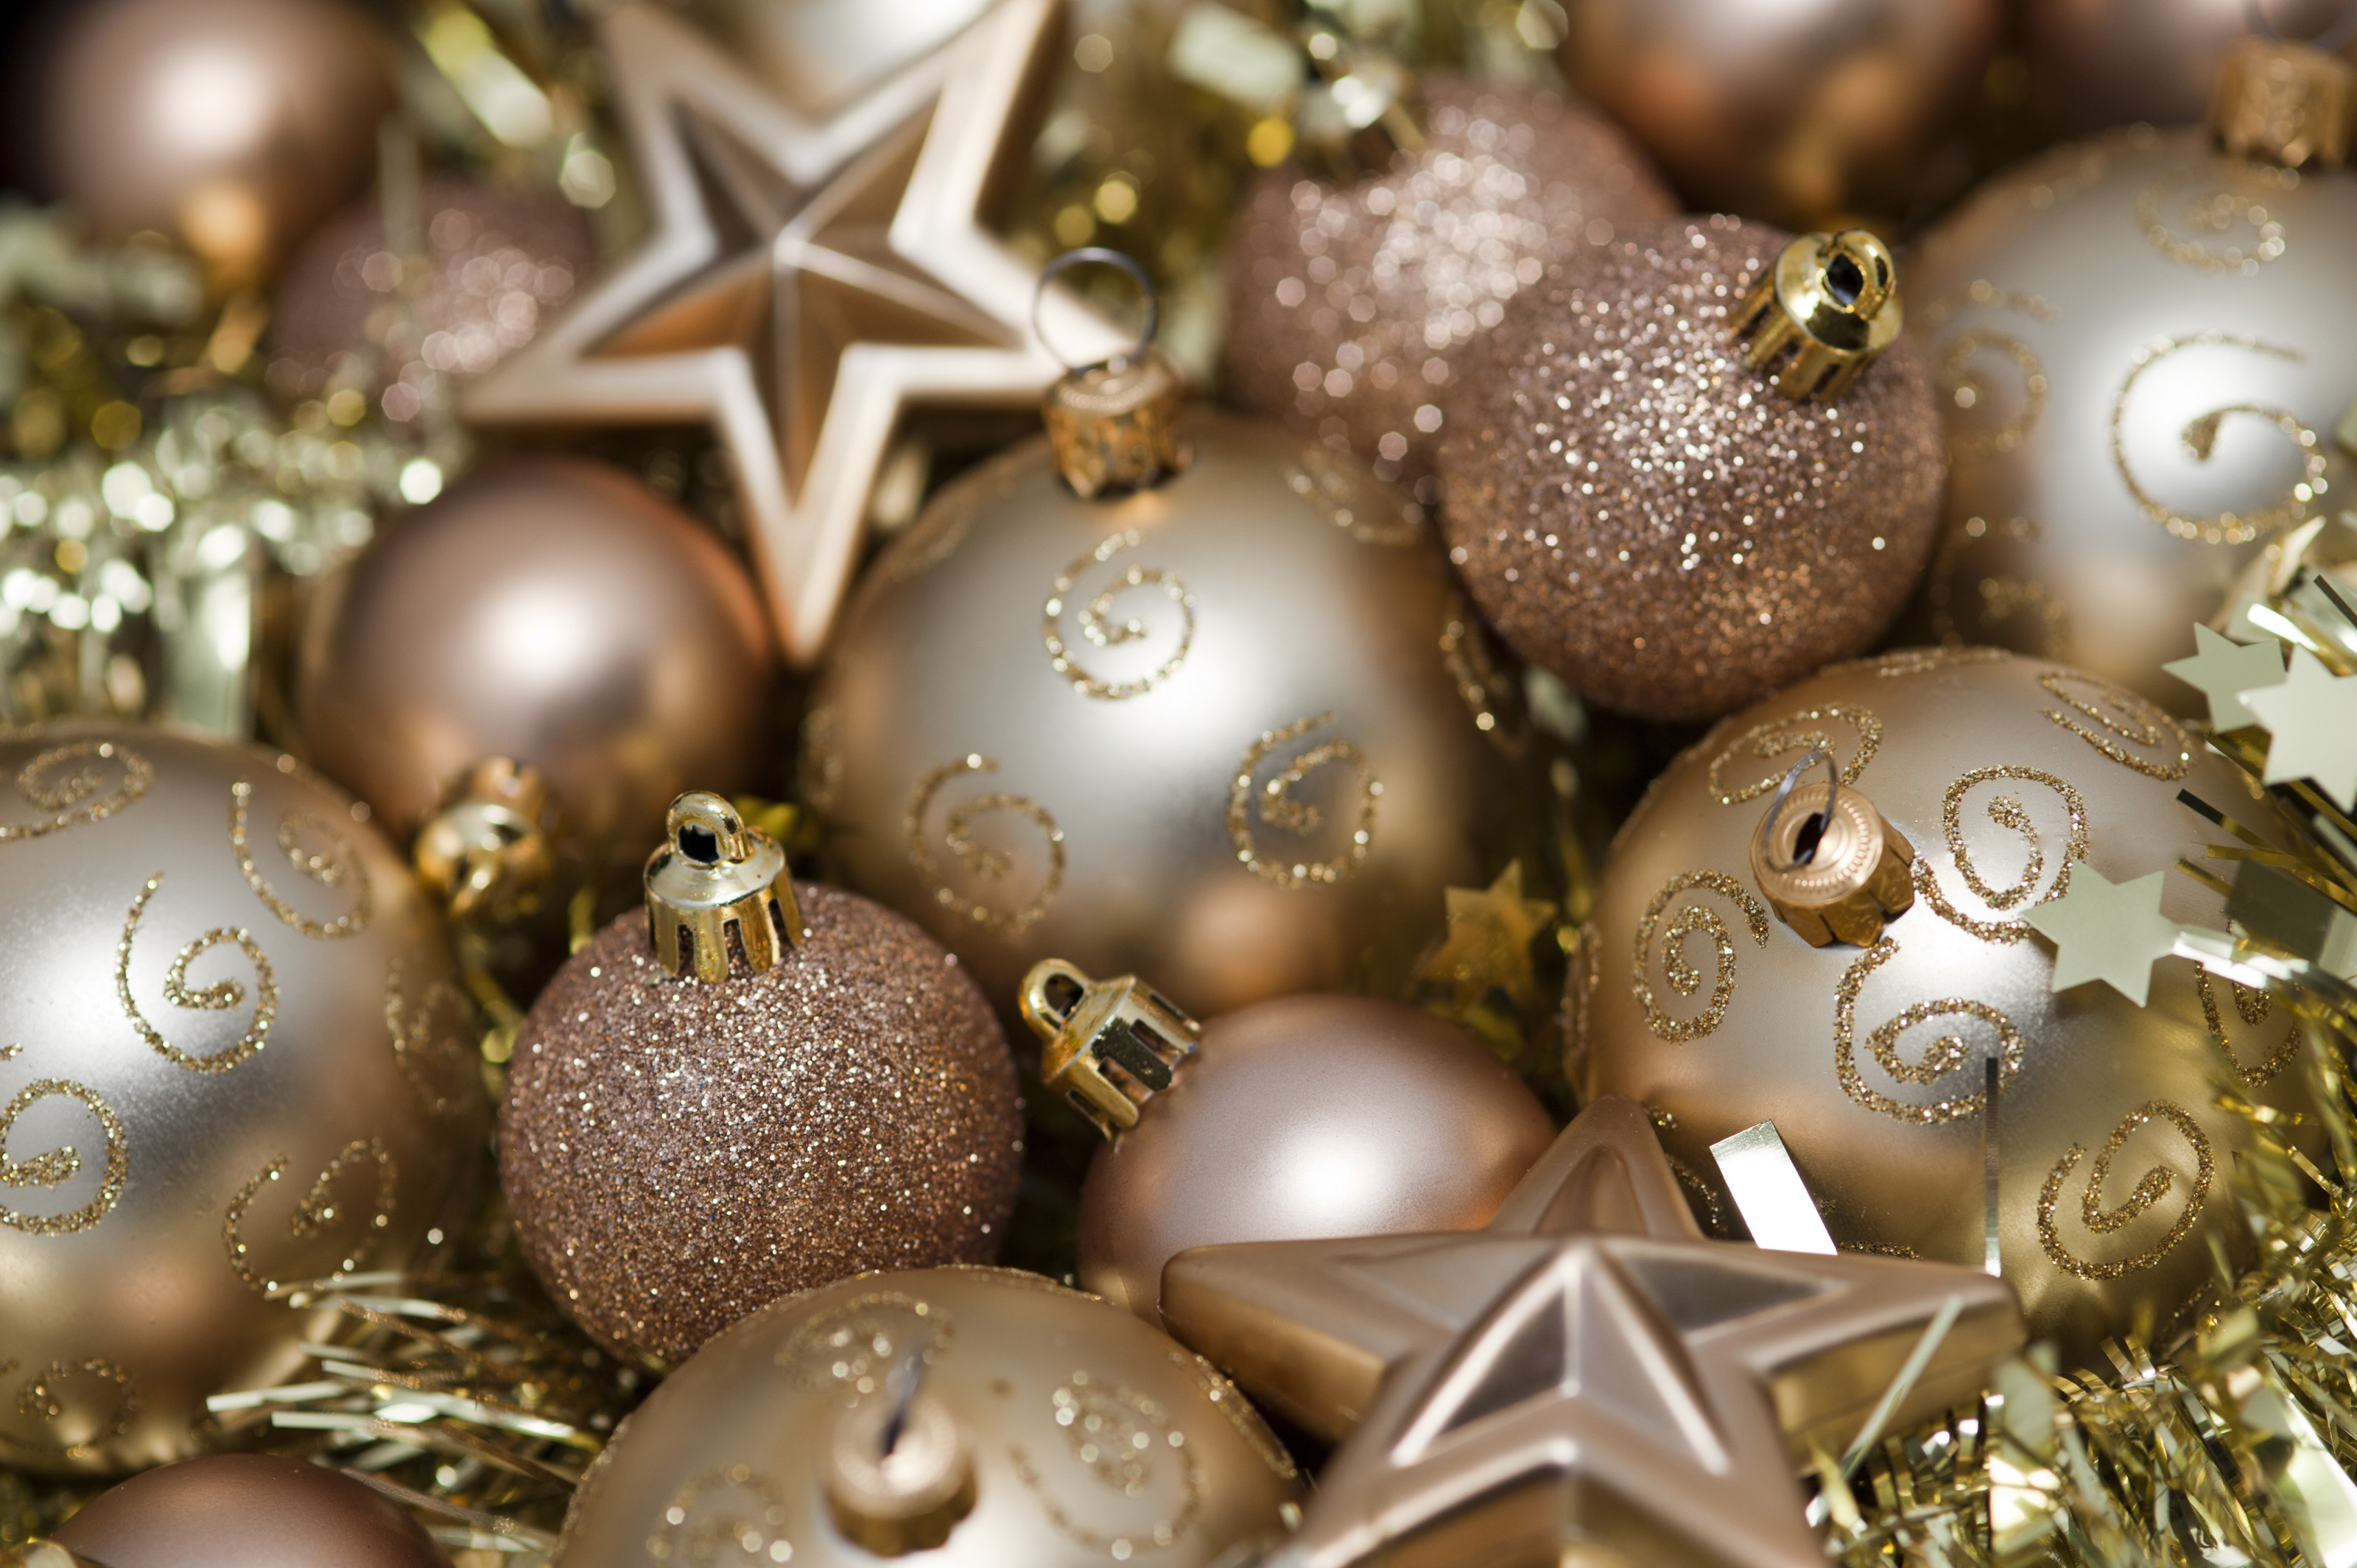 Gold Christmas decoration background6362  Stockarch Free Stock Photos